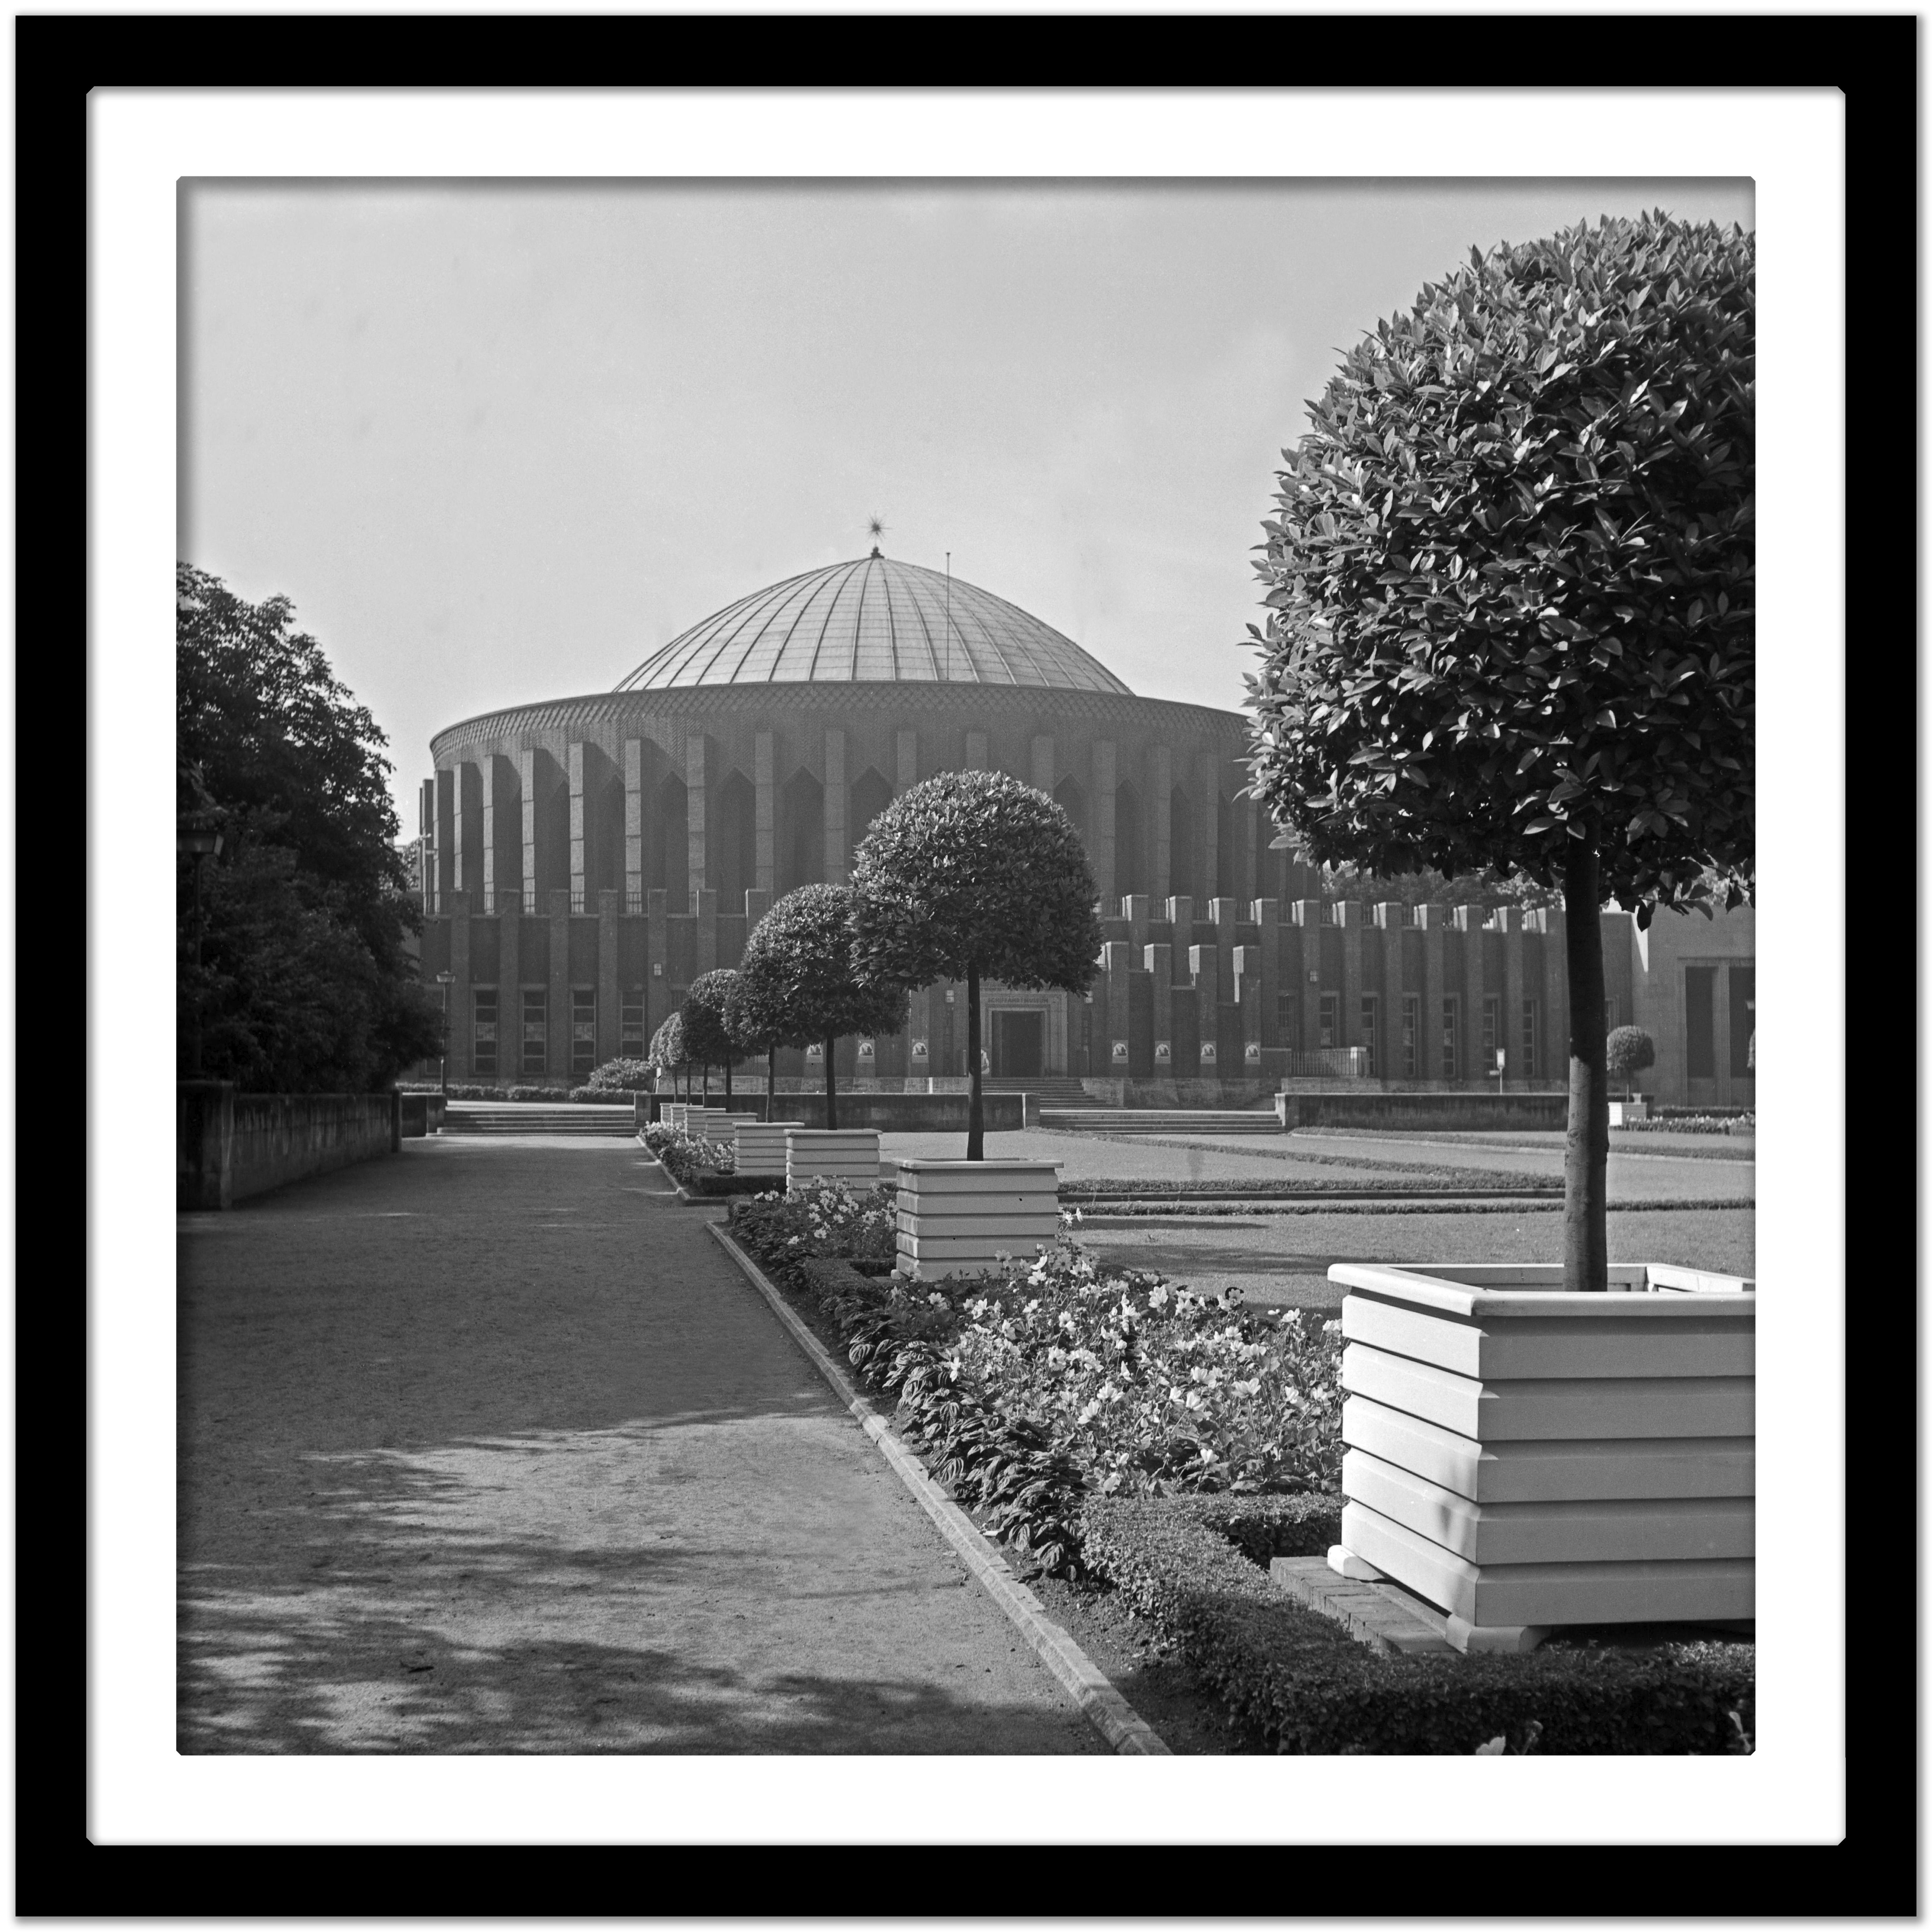 Duesseldorf planetarium and Shipping Museum, Germany 1937 Printed Later  - Black Black and White Photograph by Karl Heinrich Lämmel